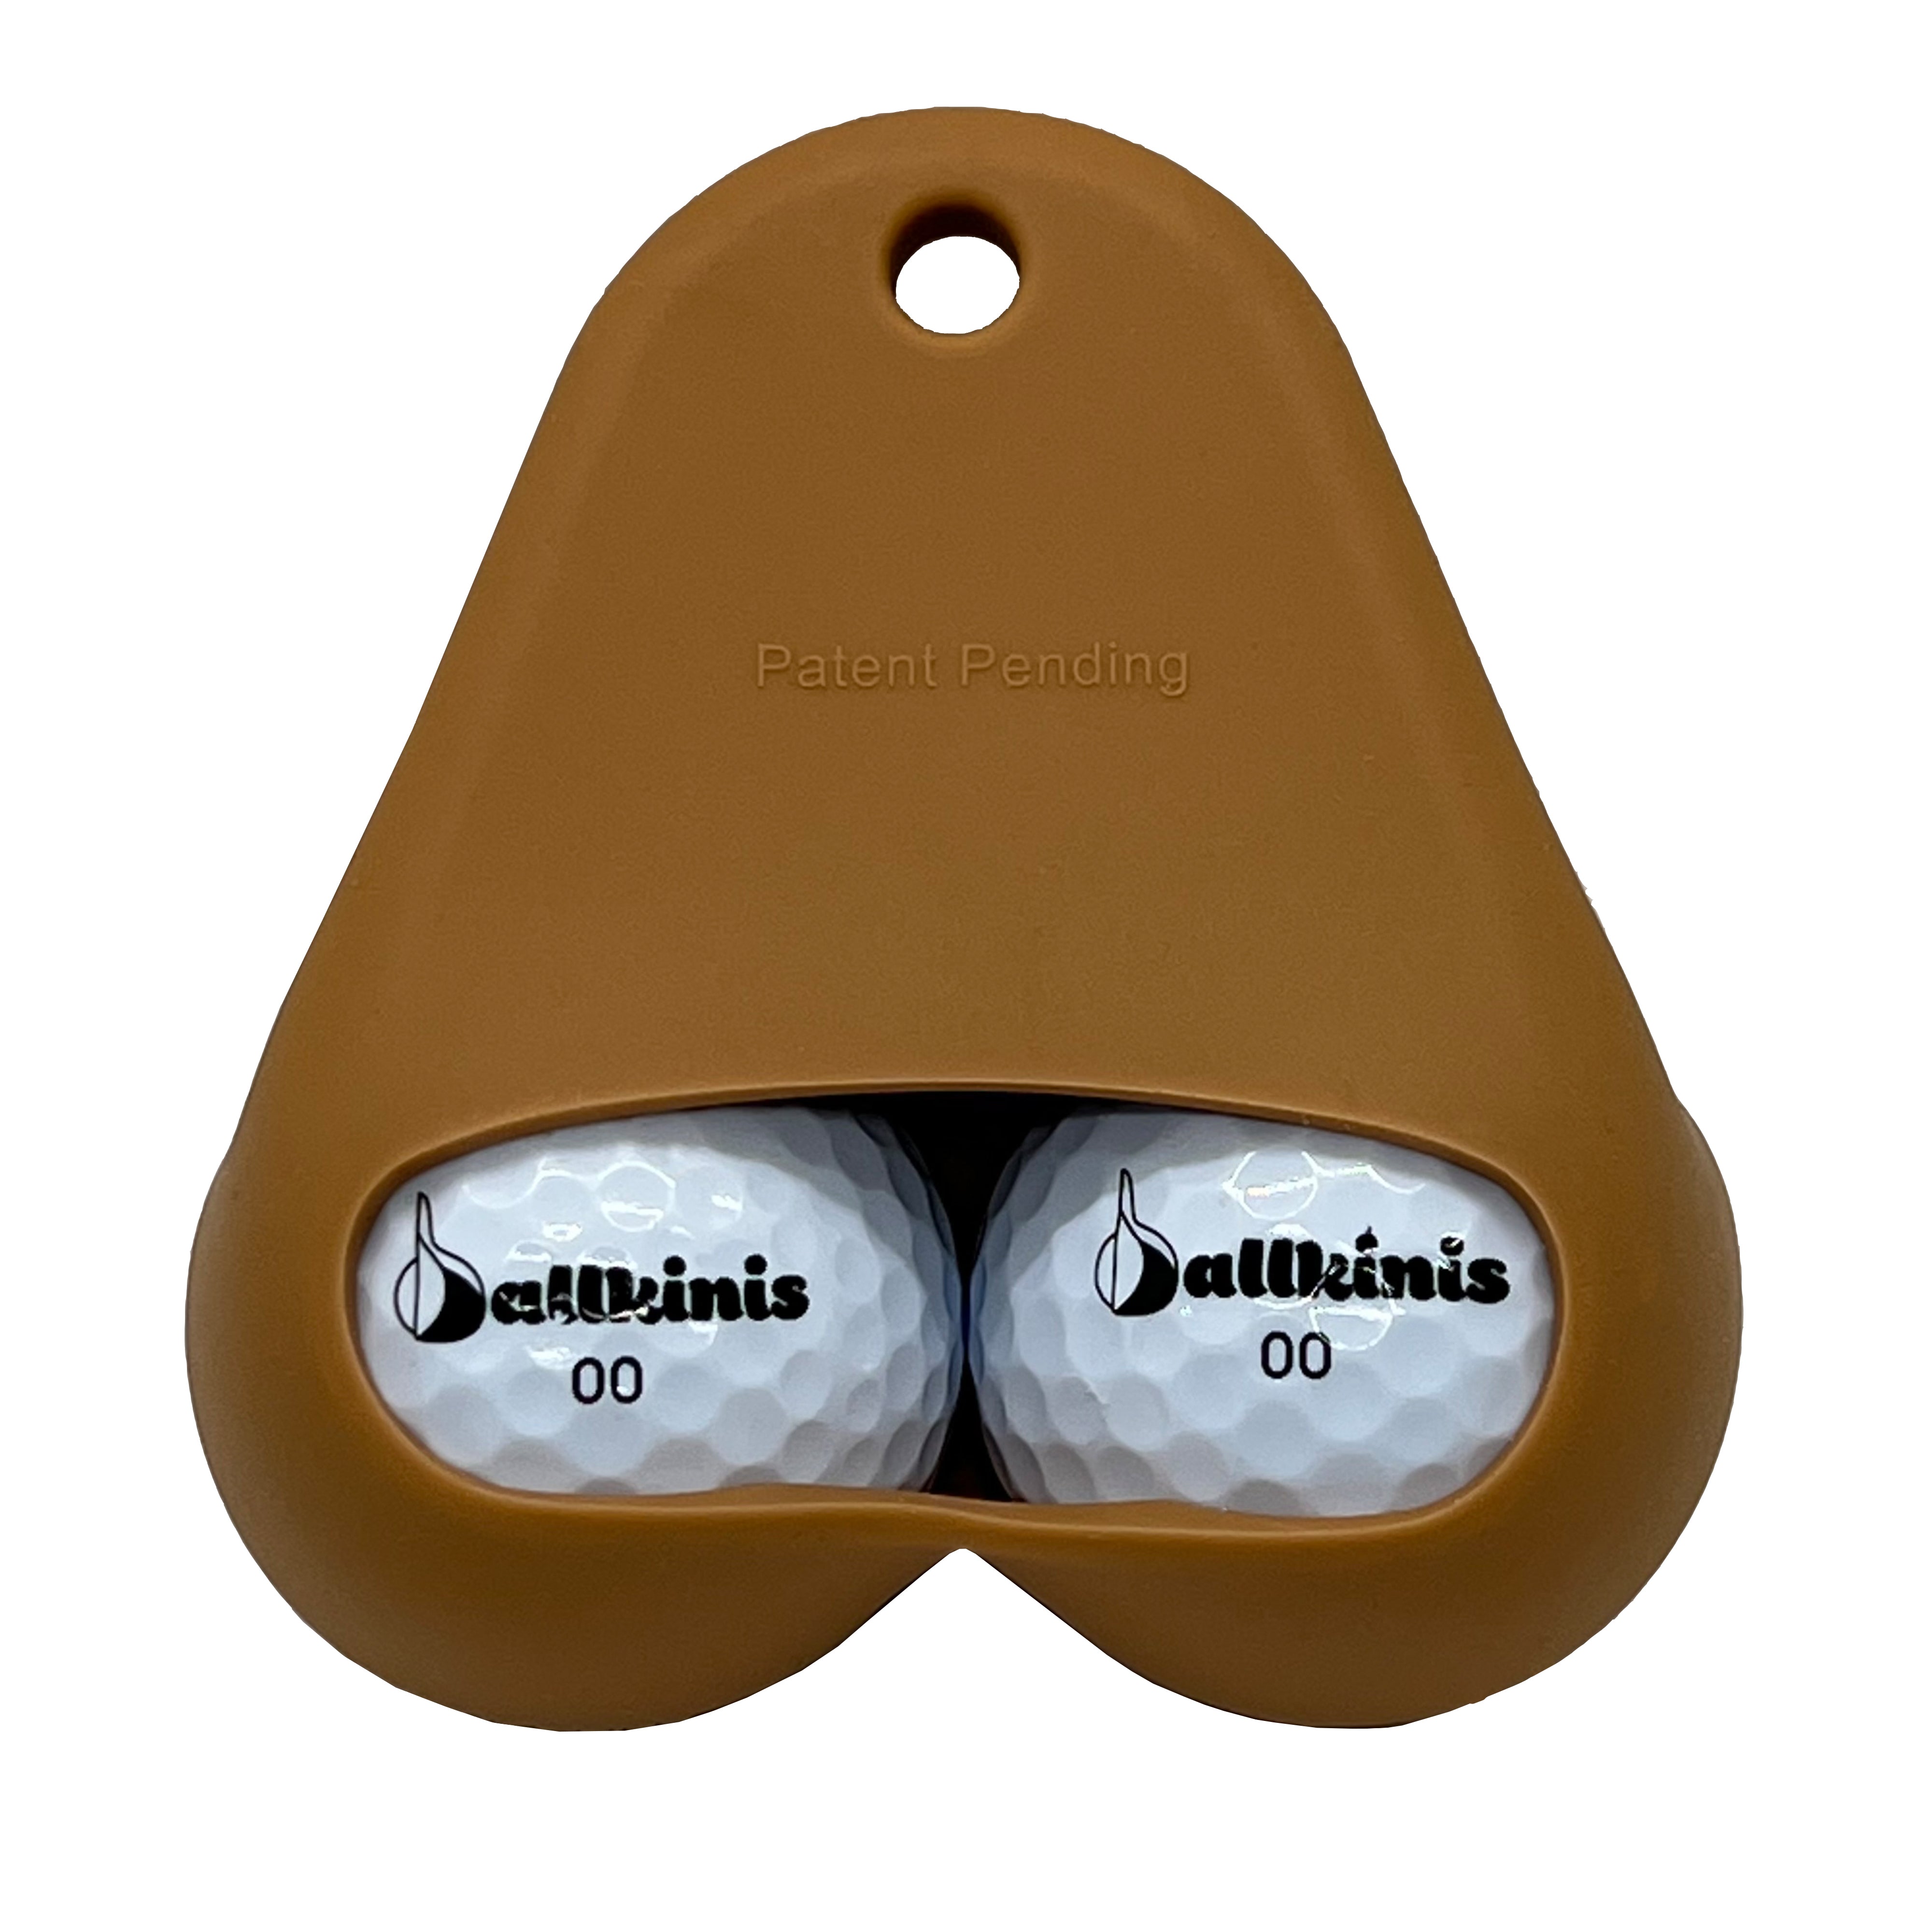 Balls-Sack Golf Ball Storage Bag  This Funny Golf Gift Is Sure to